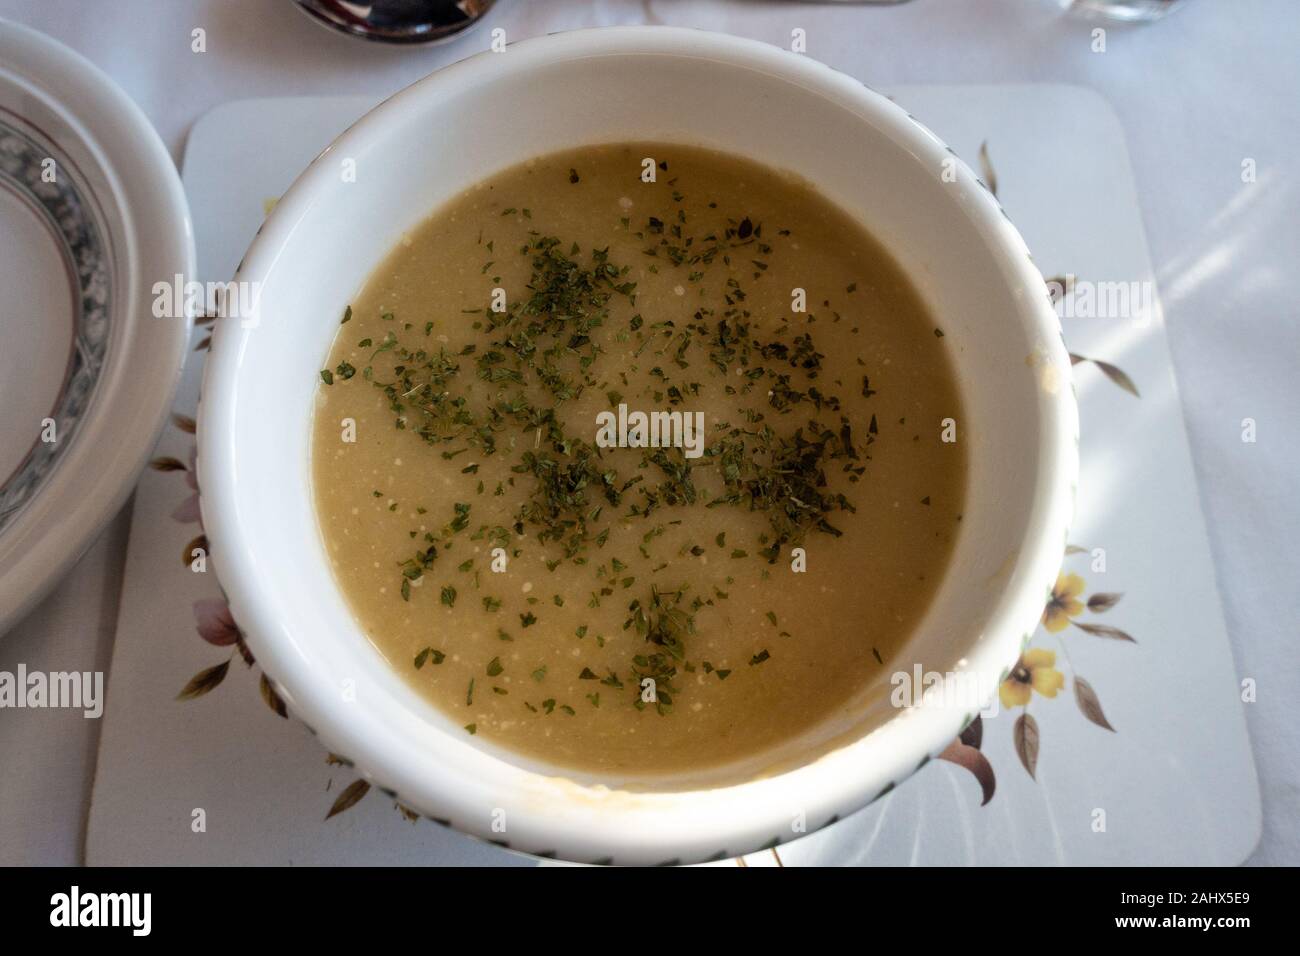 A bowl of homemade leek and potato soup garnished with s sprinkle of parsley. Stock Photo